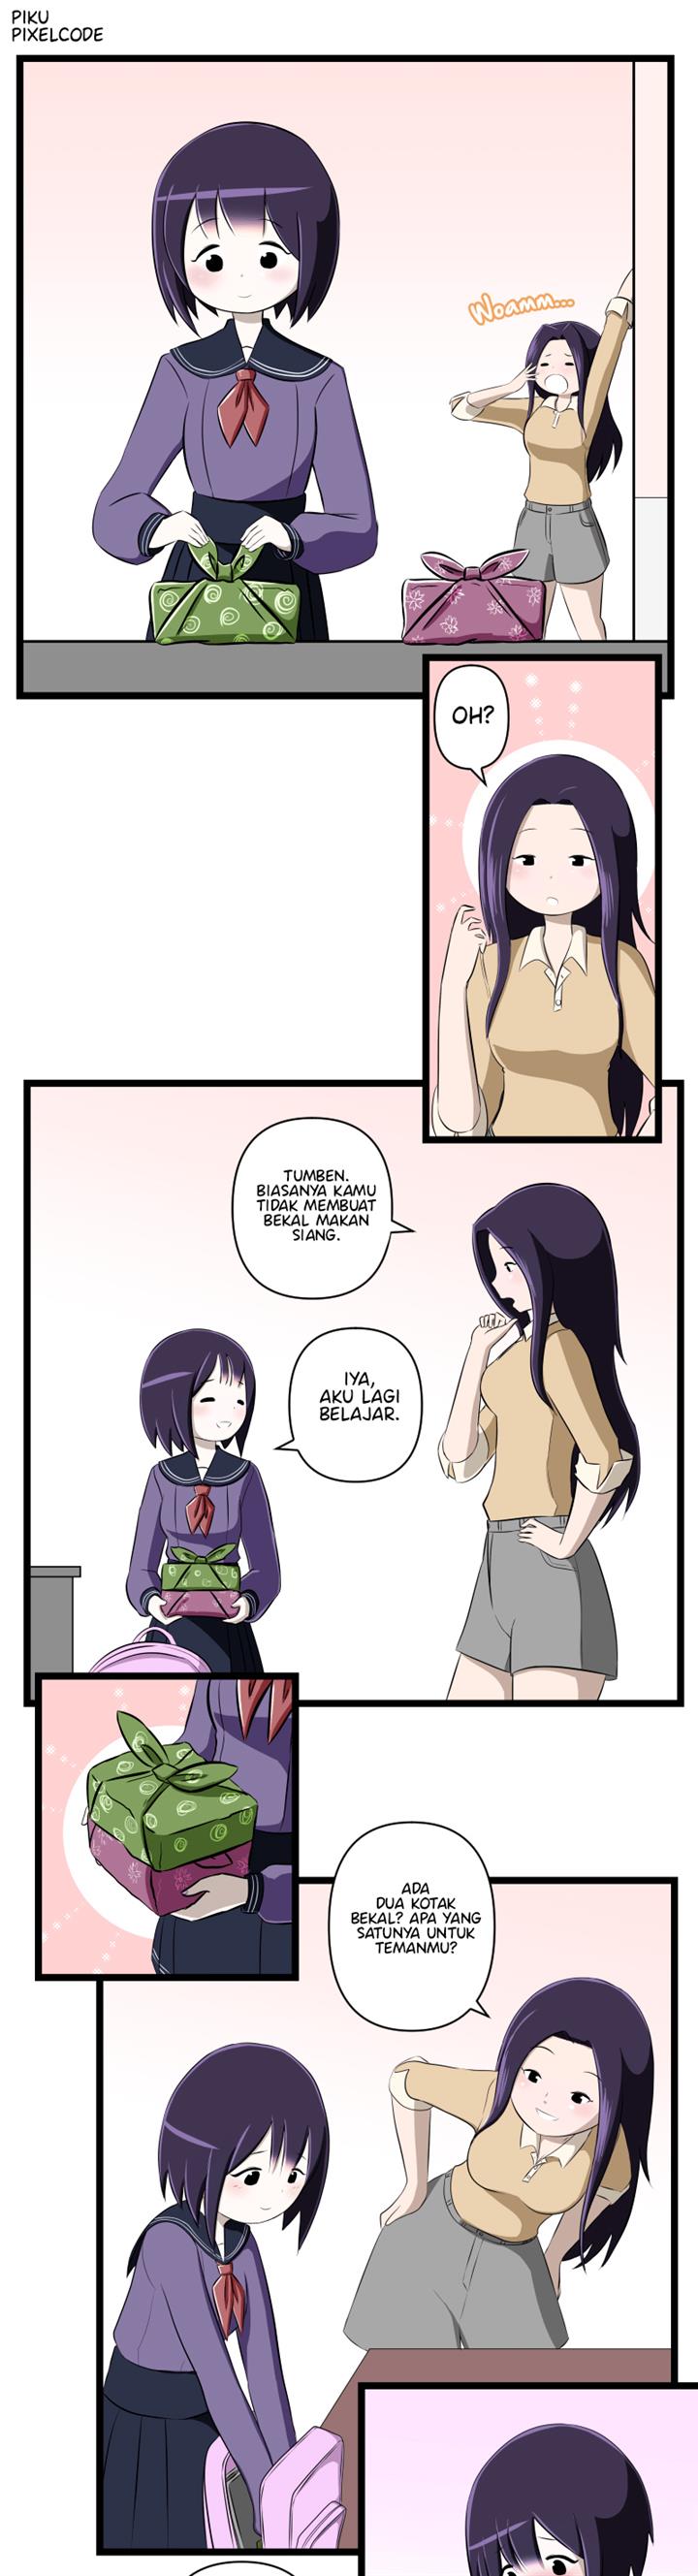 Wholesome Yandere Strategy Chapter 2